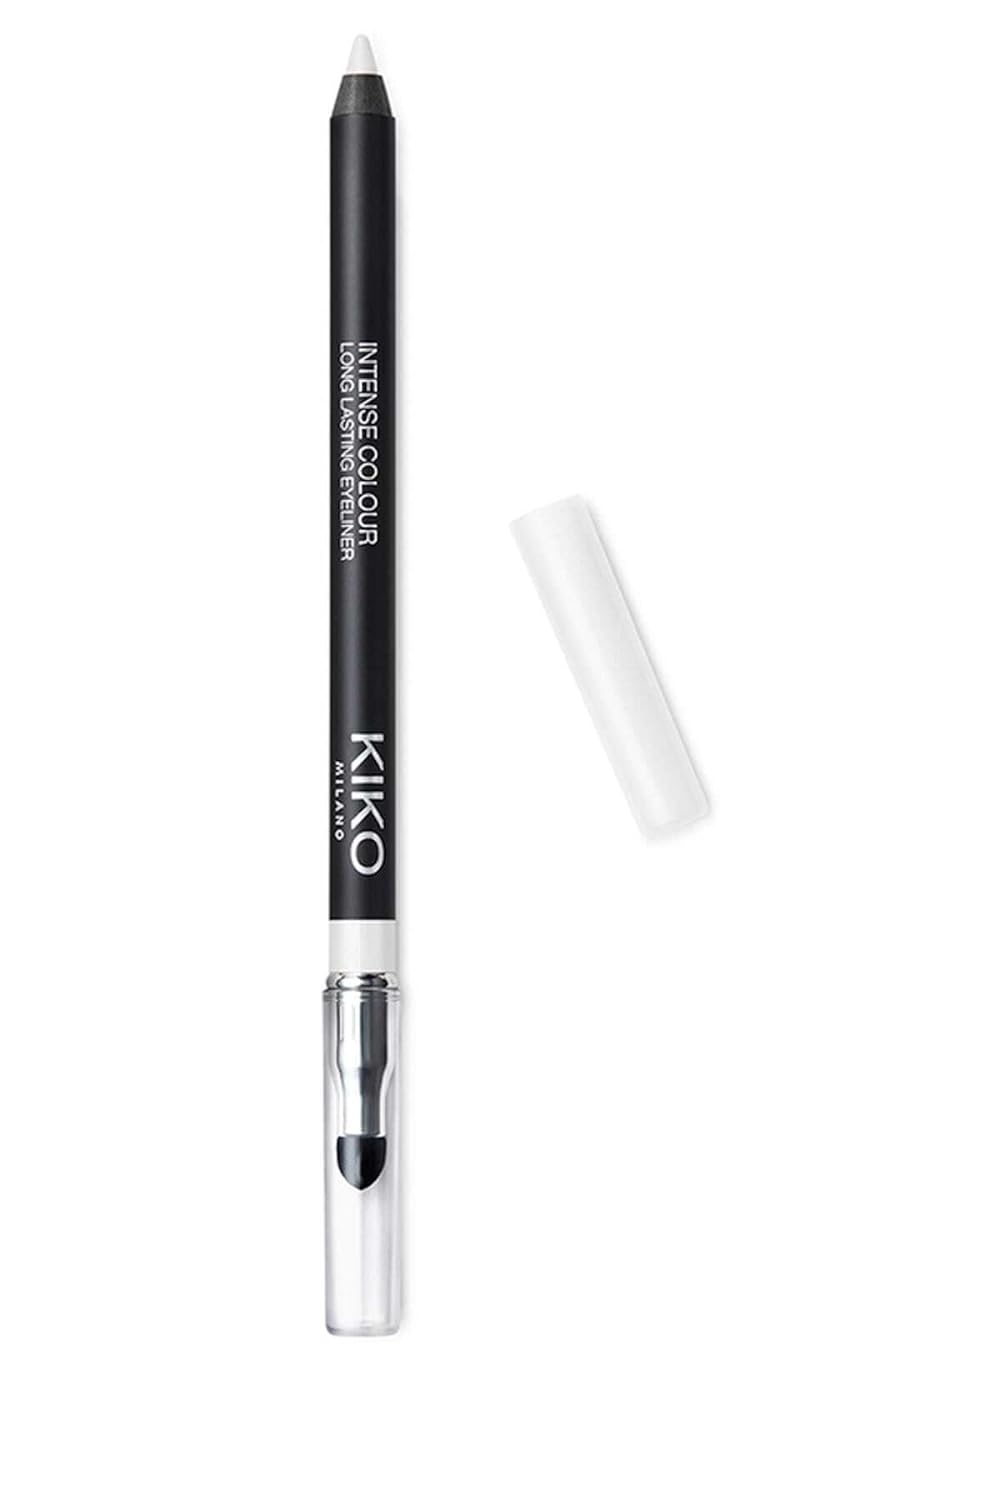 Kiko Milano Intense Colour Long Lasting Eyeliner 01 | Intense And Smooth-gliding Outer Eye Pencil With Long Wear